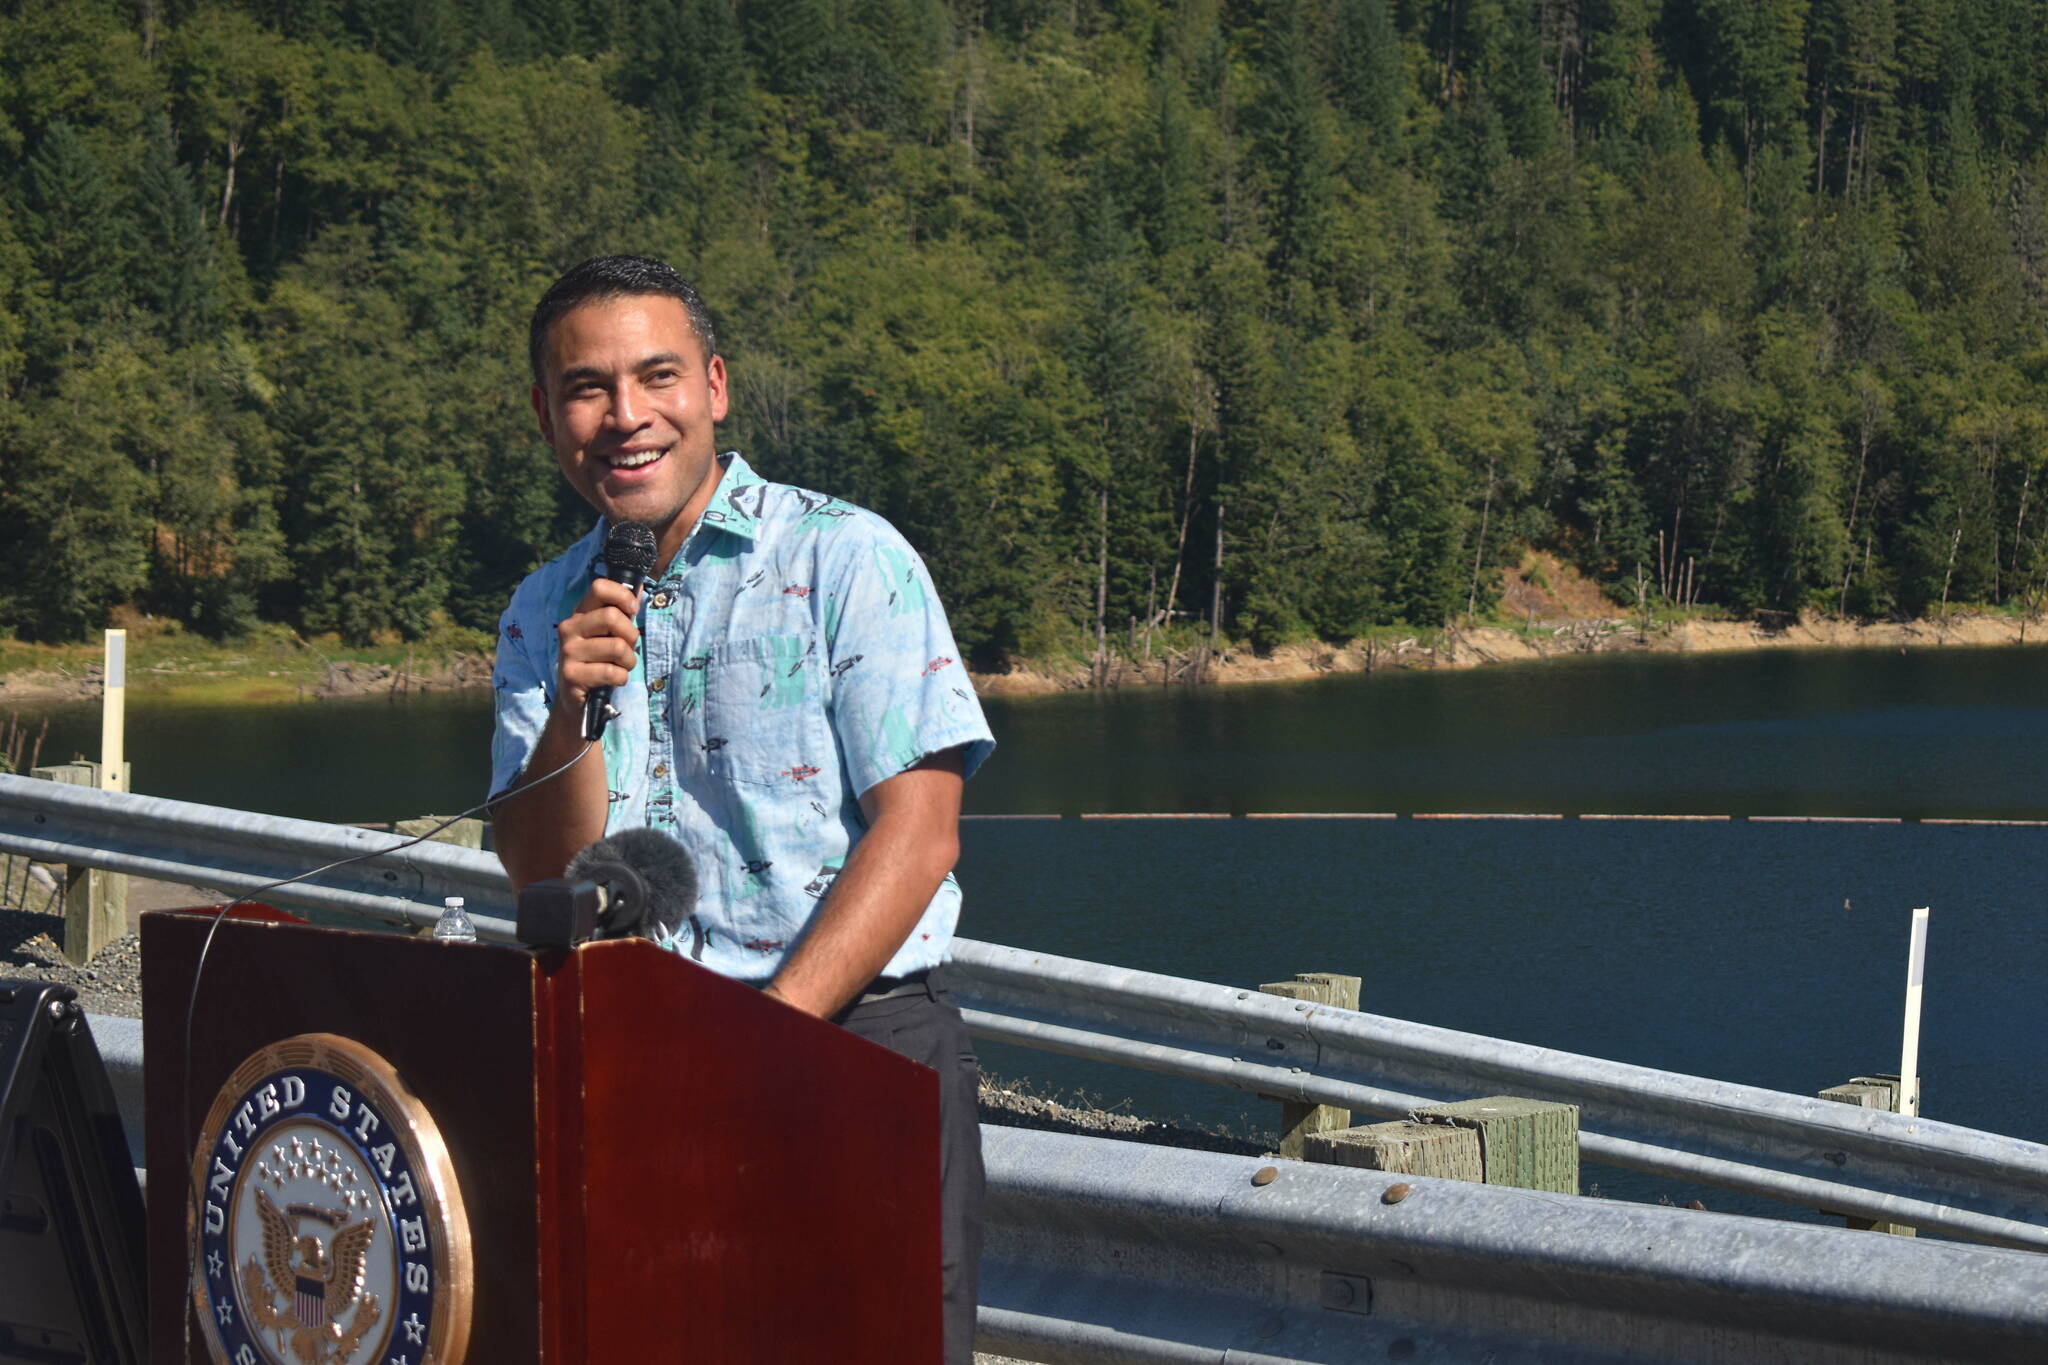 Muckleshoot Tribal Council Chairperson Jaison Elkins speaks during a ceremony celebrating fish passage efforts at Howard Hanson Dam near Ravensdale, Washington on Aug. 30, 2022. Photo by Alex Bruell.